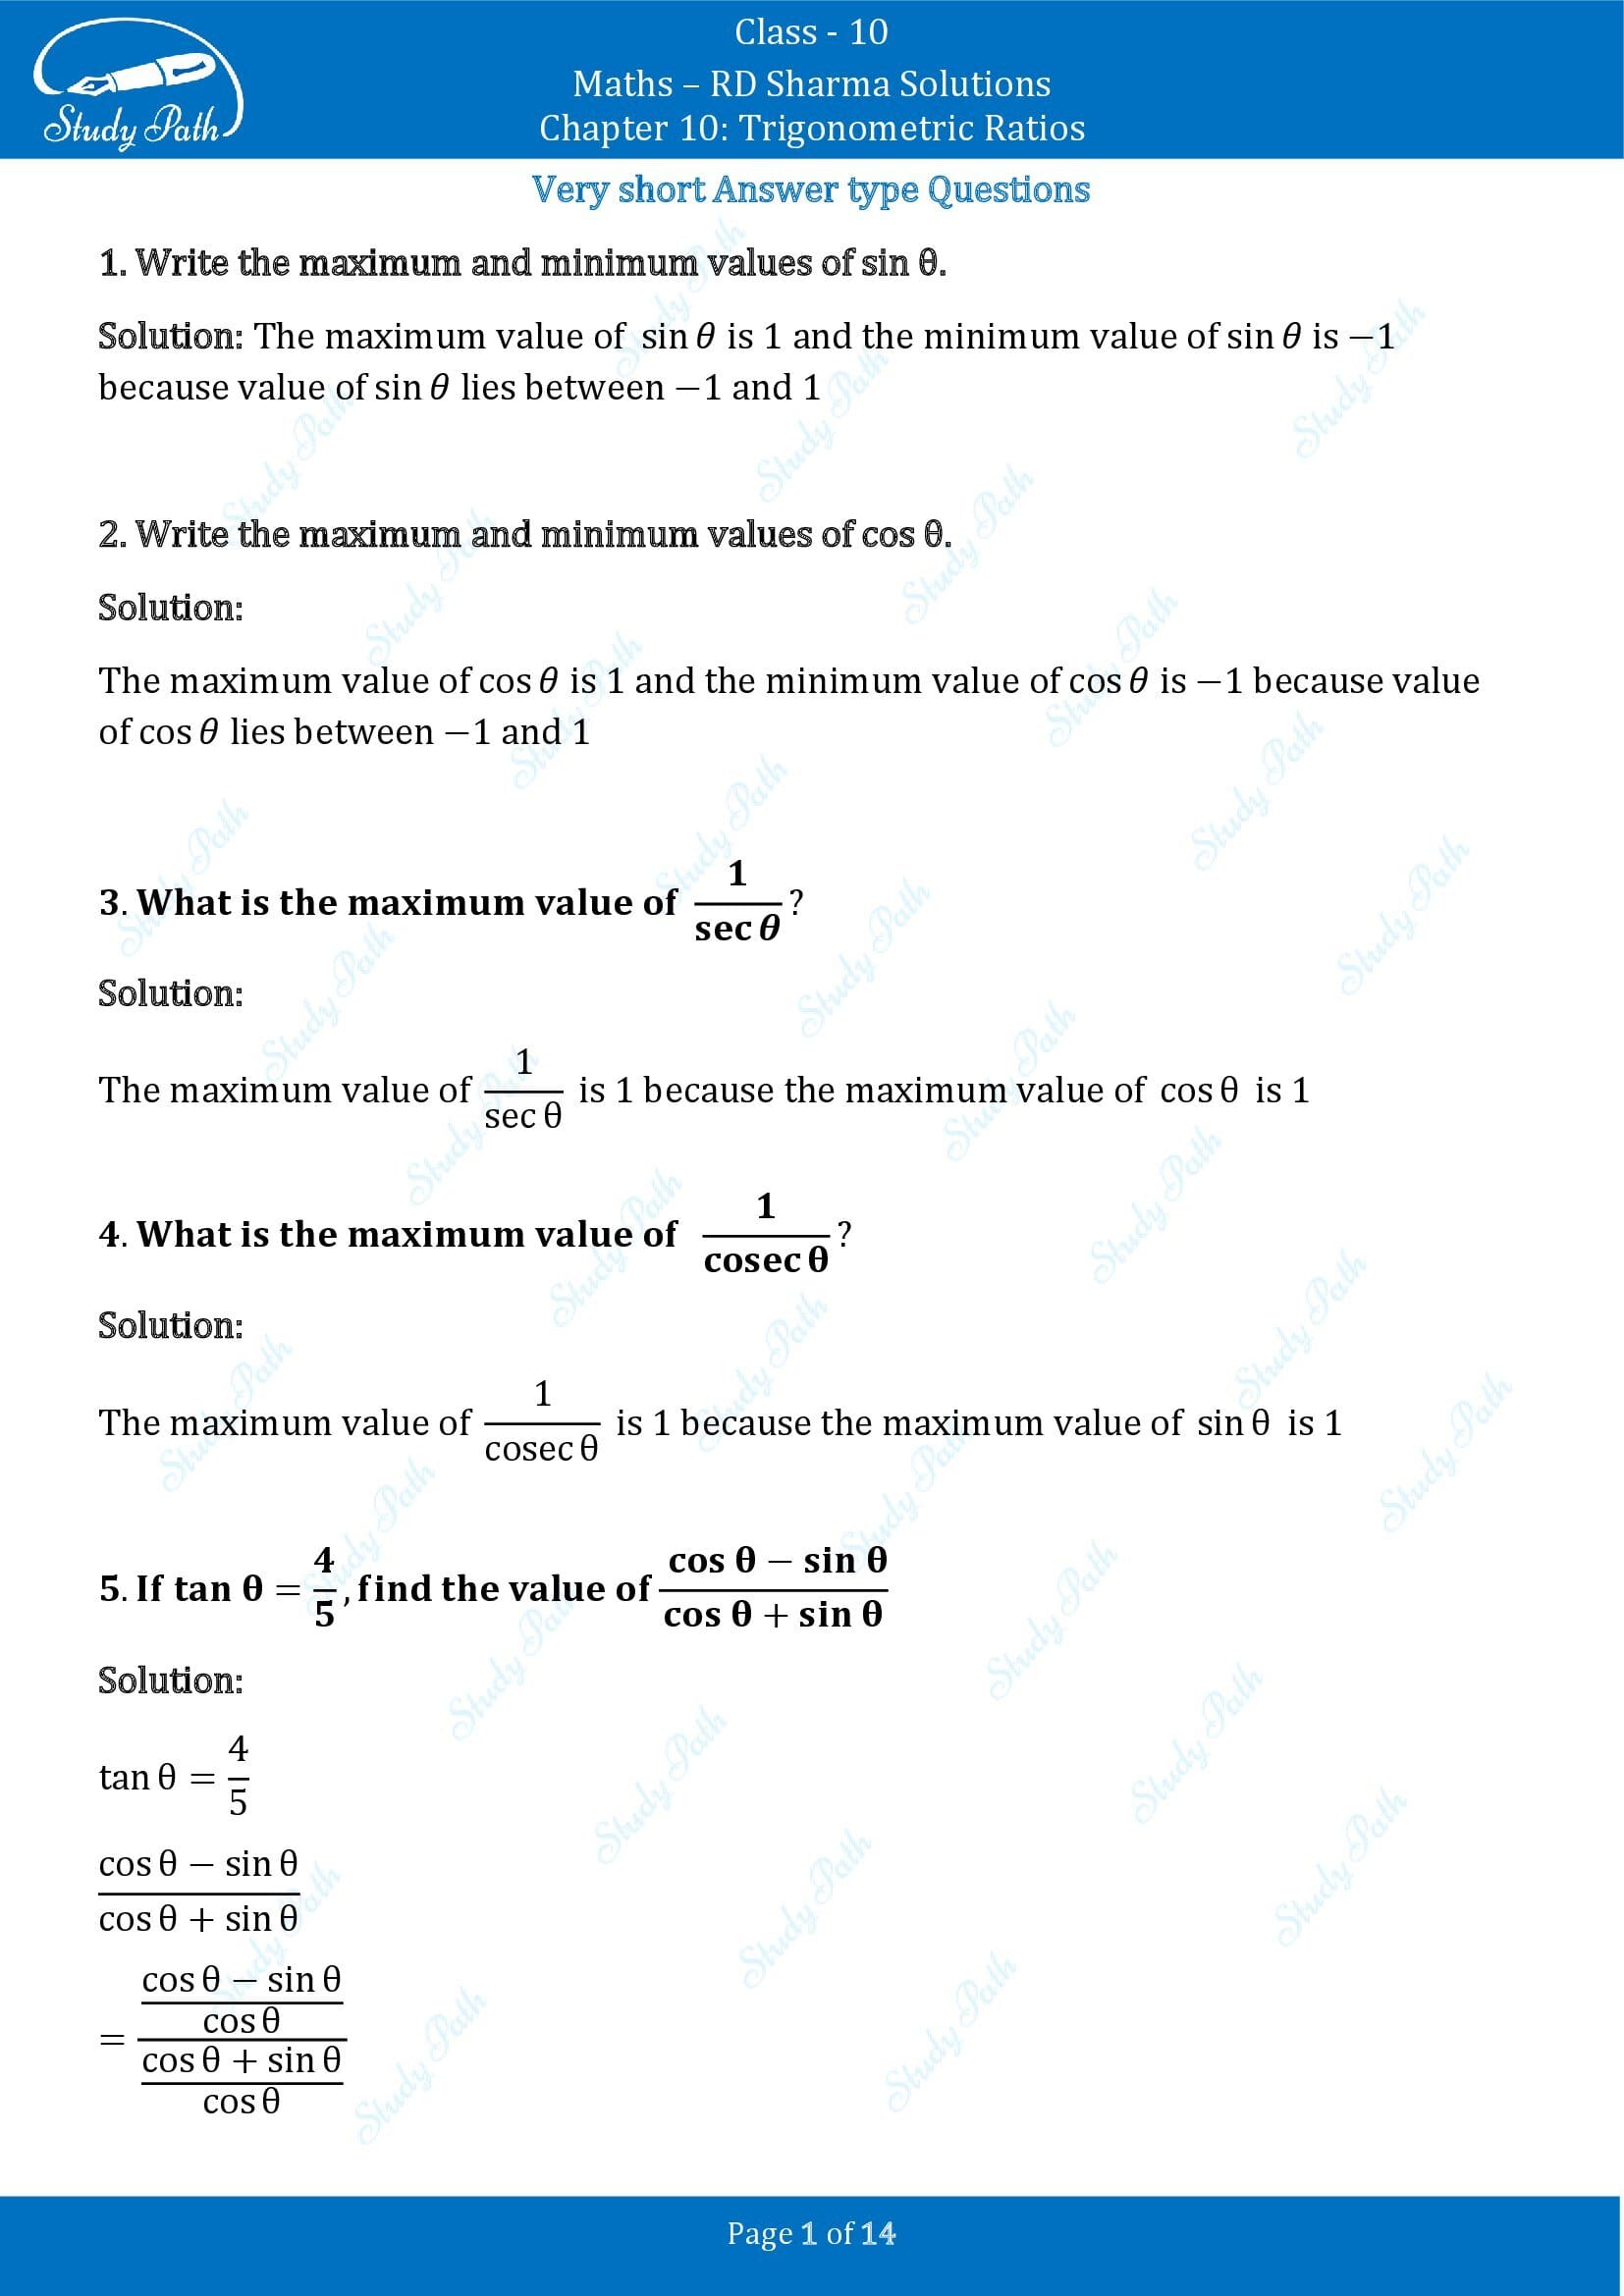 RD Sharma Solutions Class 10 Chapter 10 Trigonometric Ratios Very Short Answer Type Questions VSAQs 00001